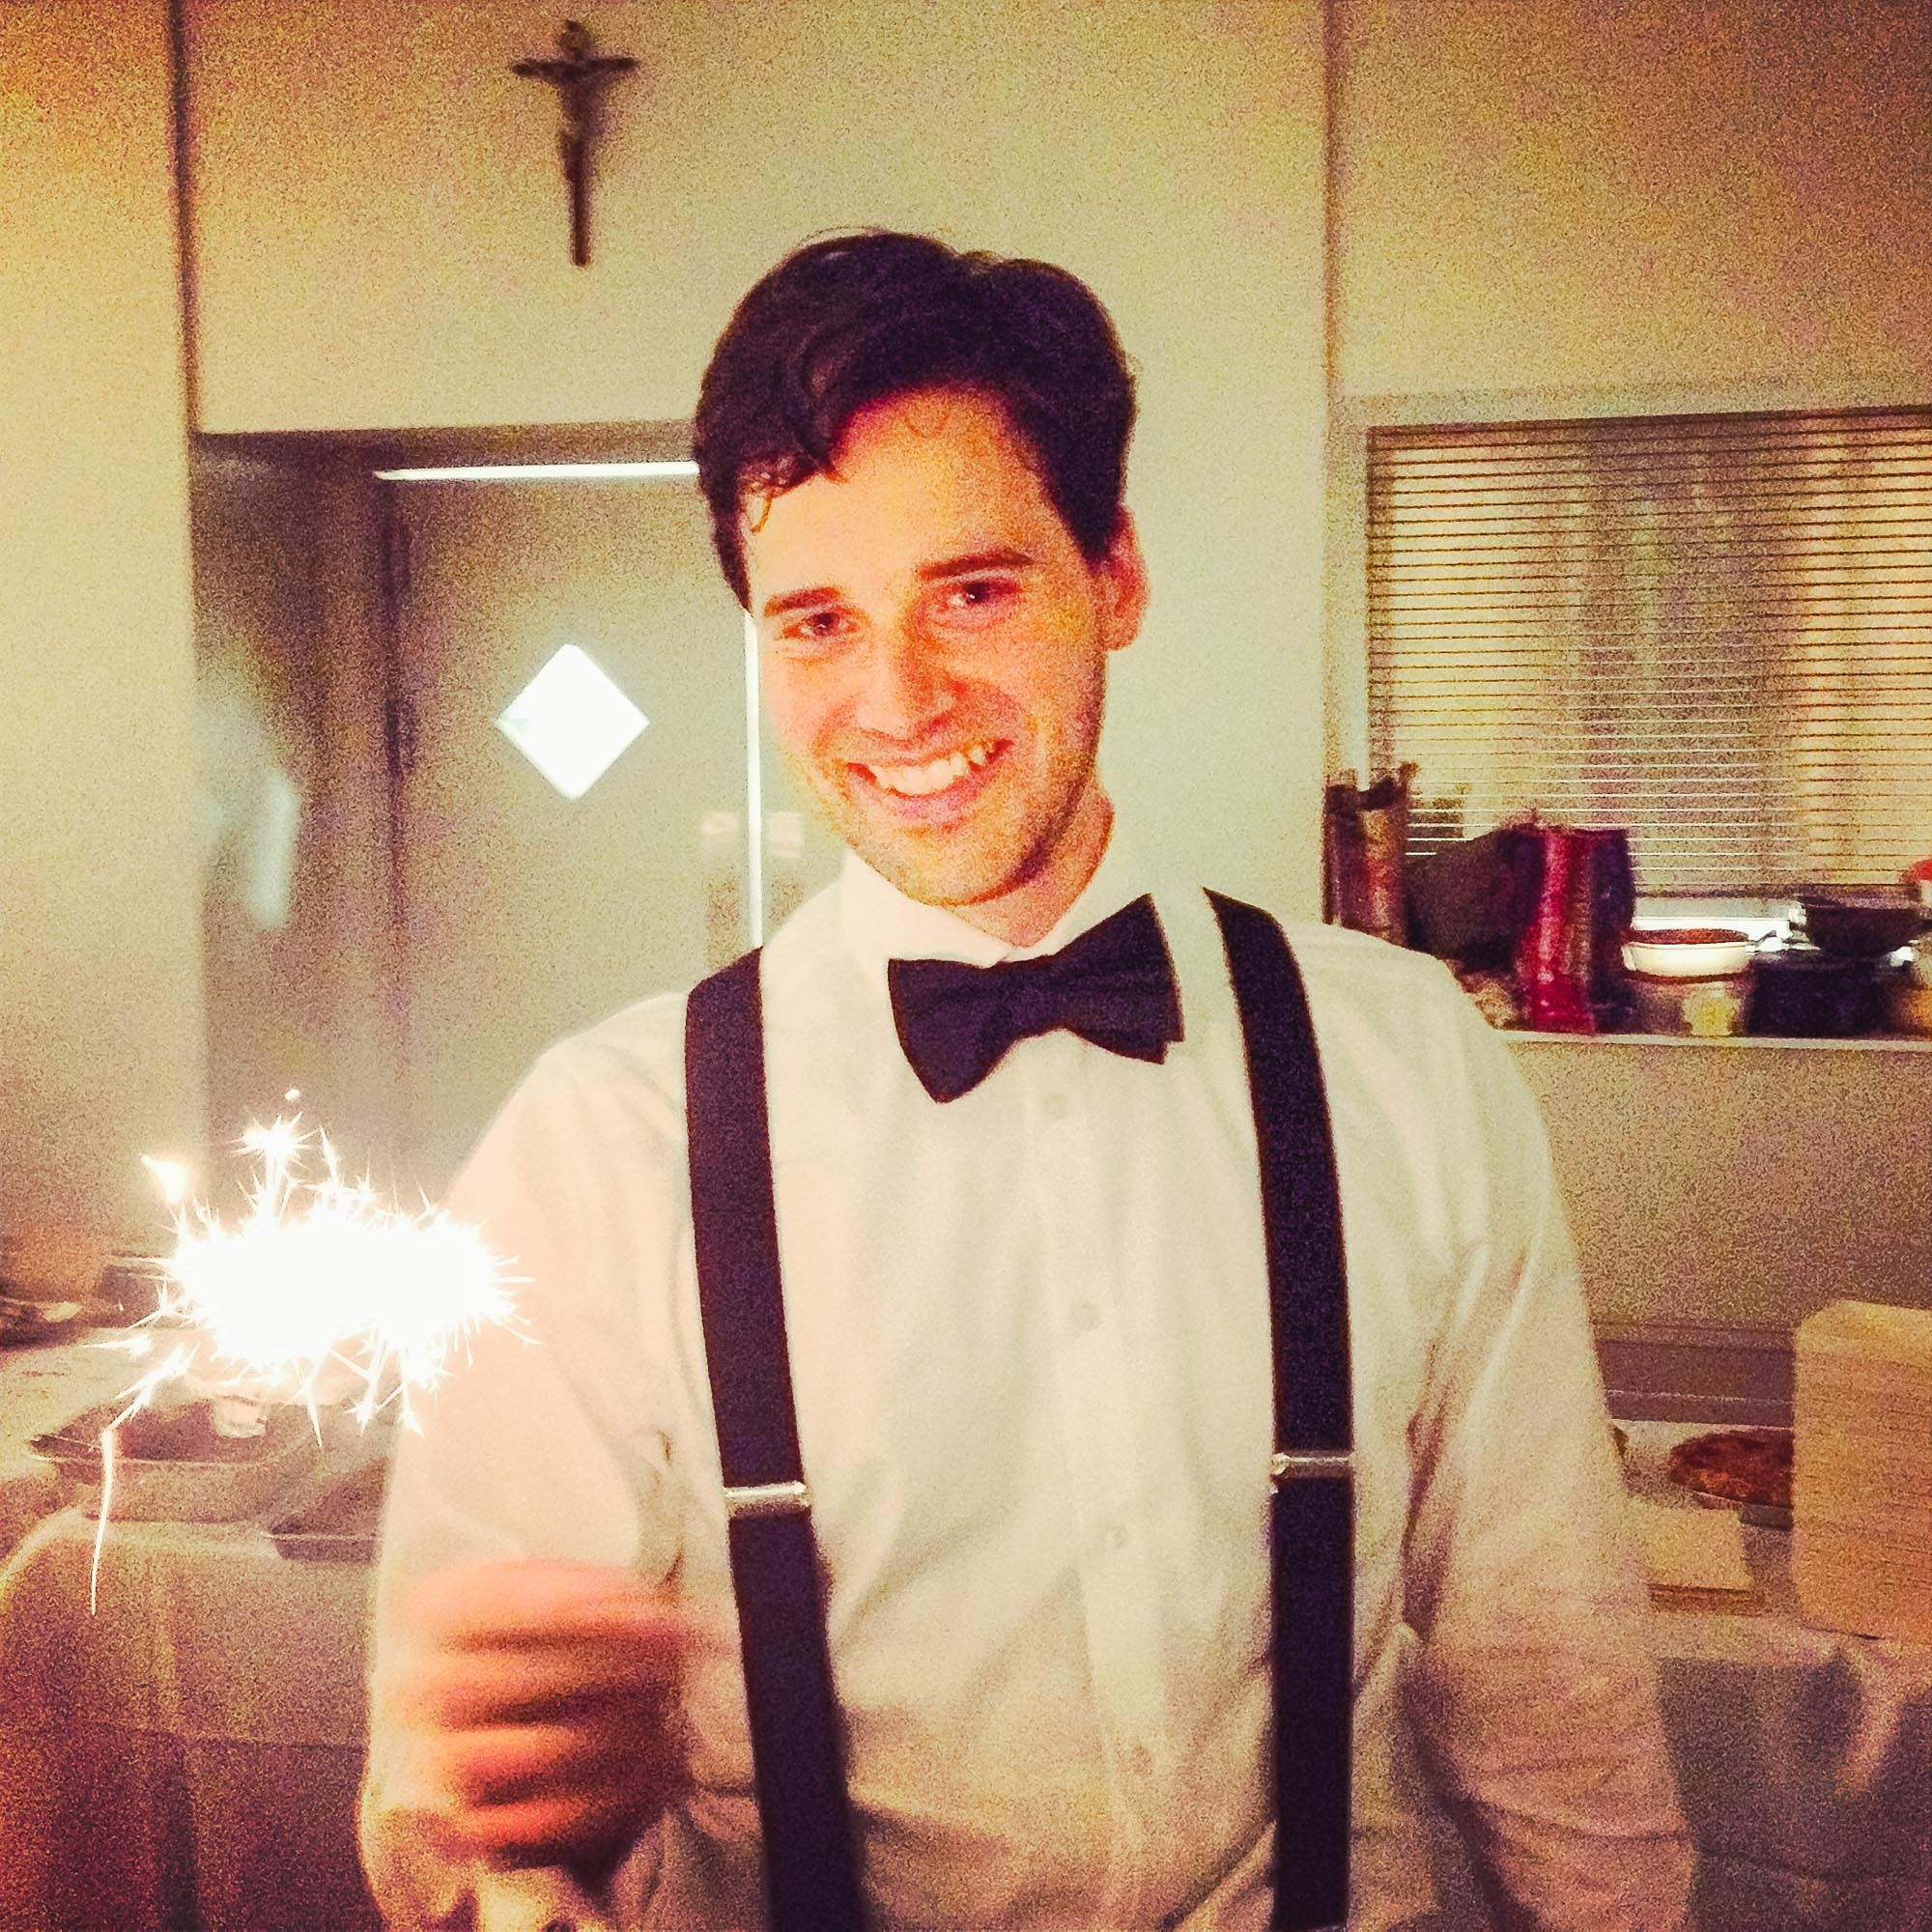 Why you don't need a wedding photographer reason 33 1/3: There are lovely filters on Instagram